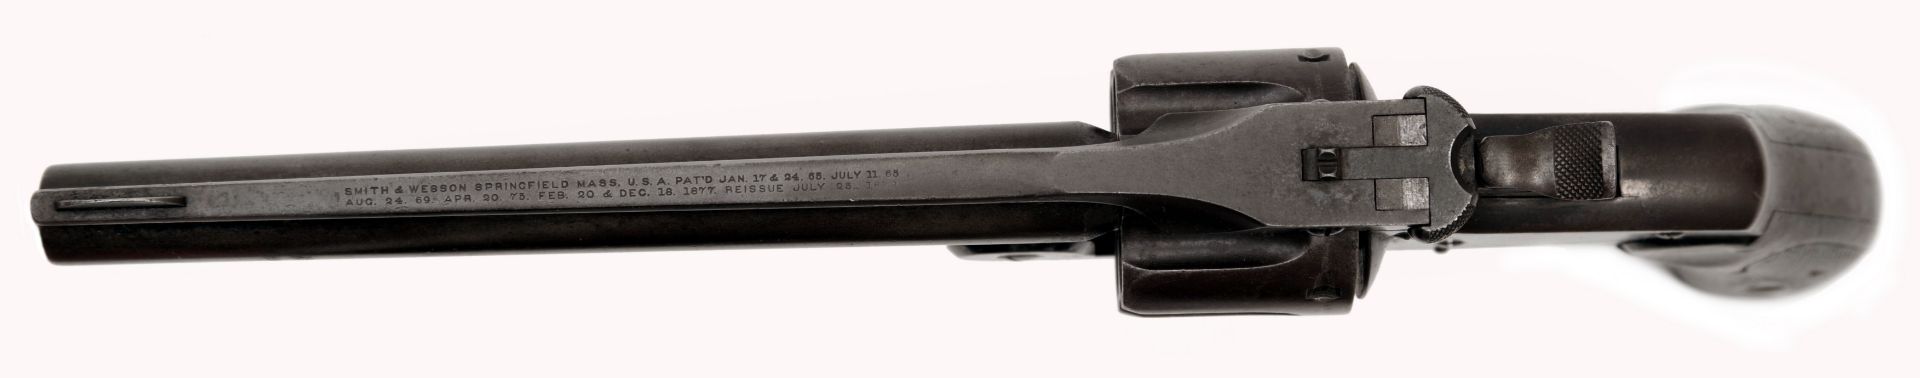 Revolver Smith & Wesson New Model No. 3 Russian - Image 4 of 5